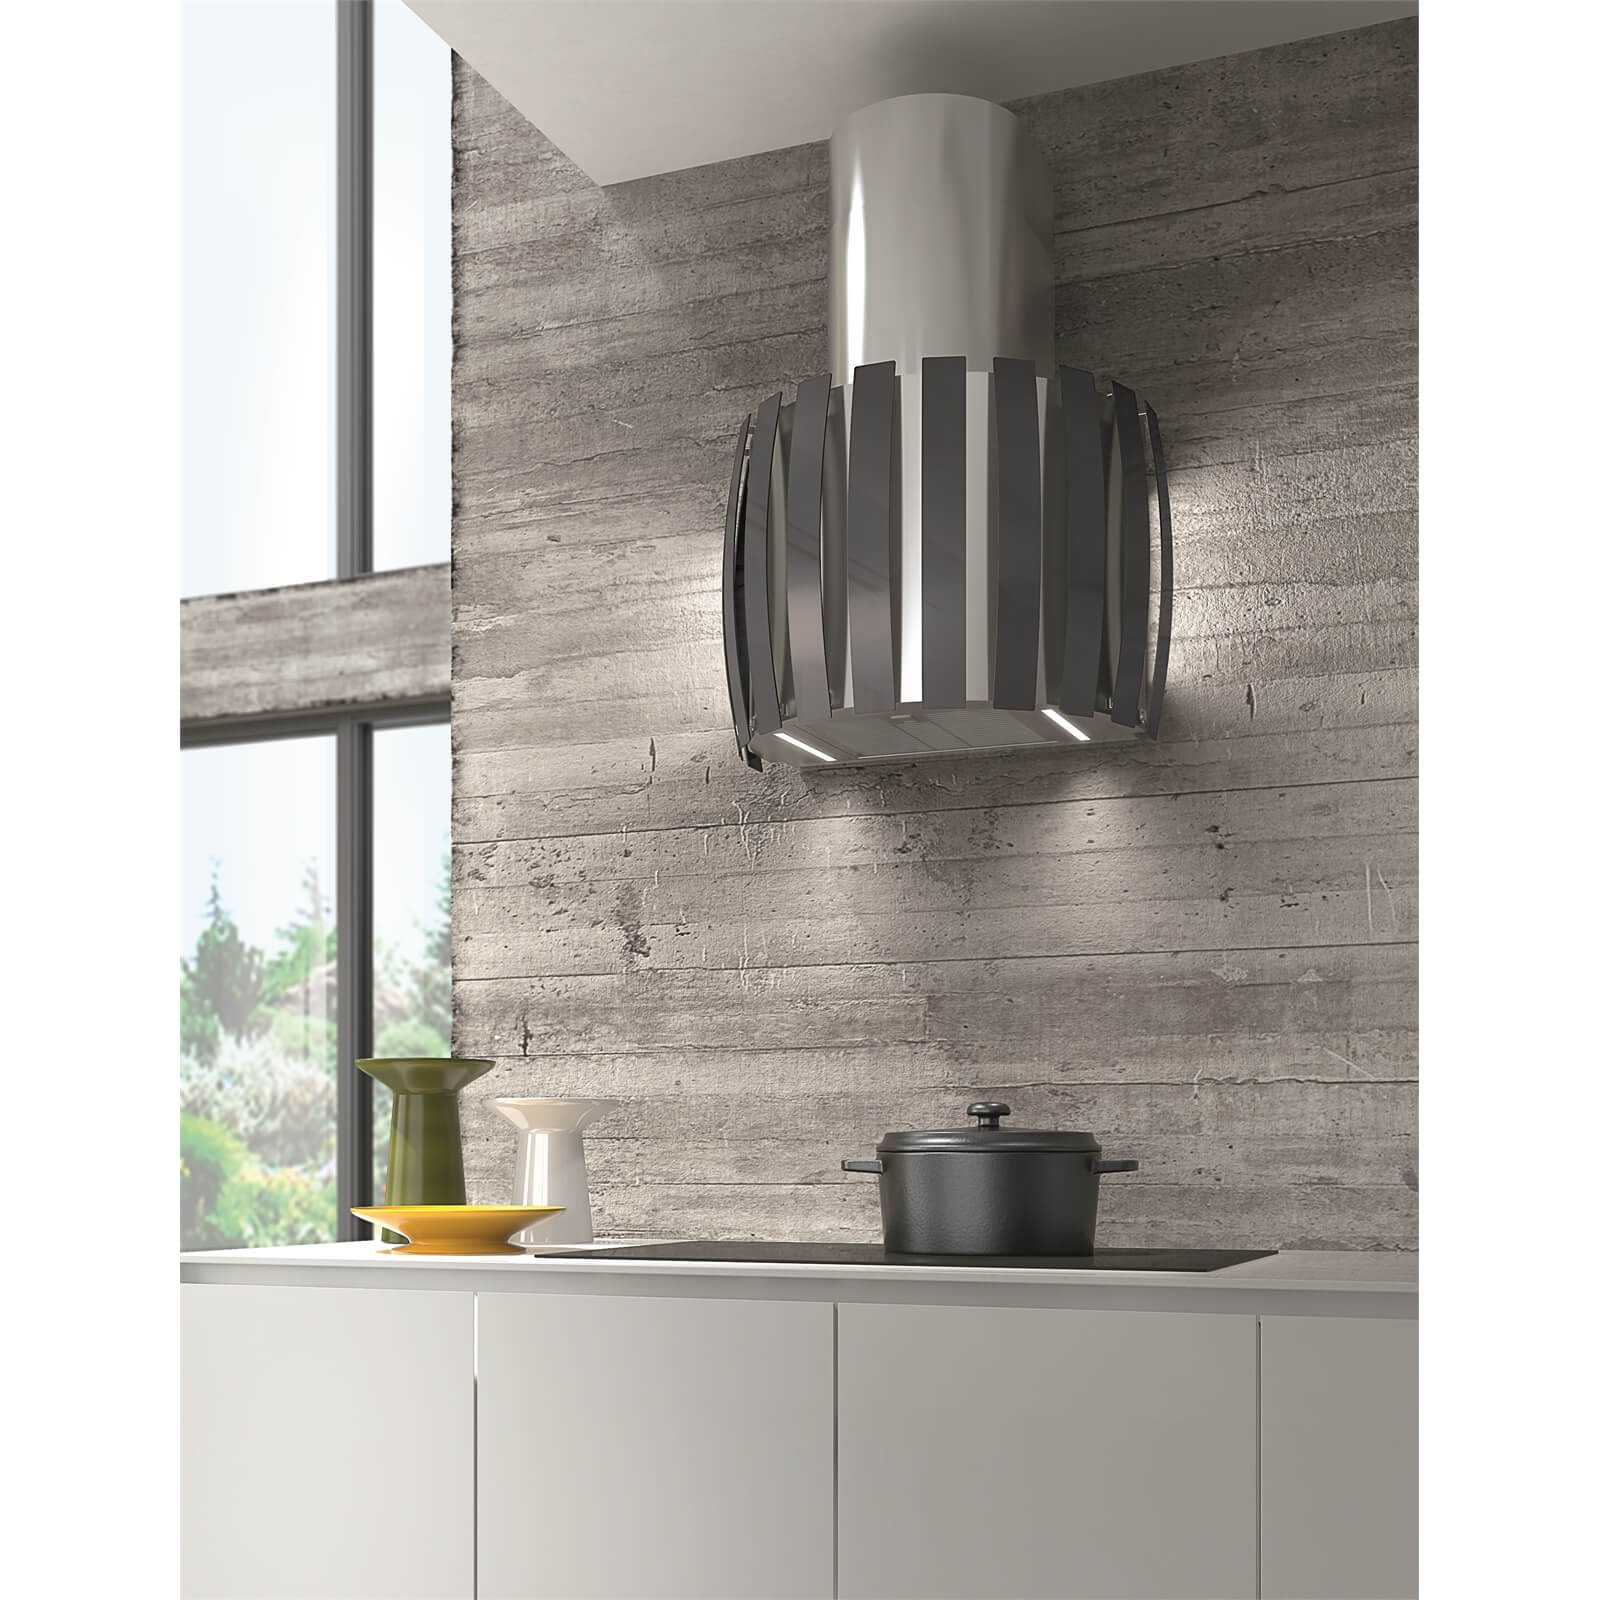 Inox Kudos Wall Mounted Extractor Stainless Steel - Grey